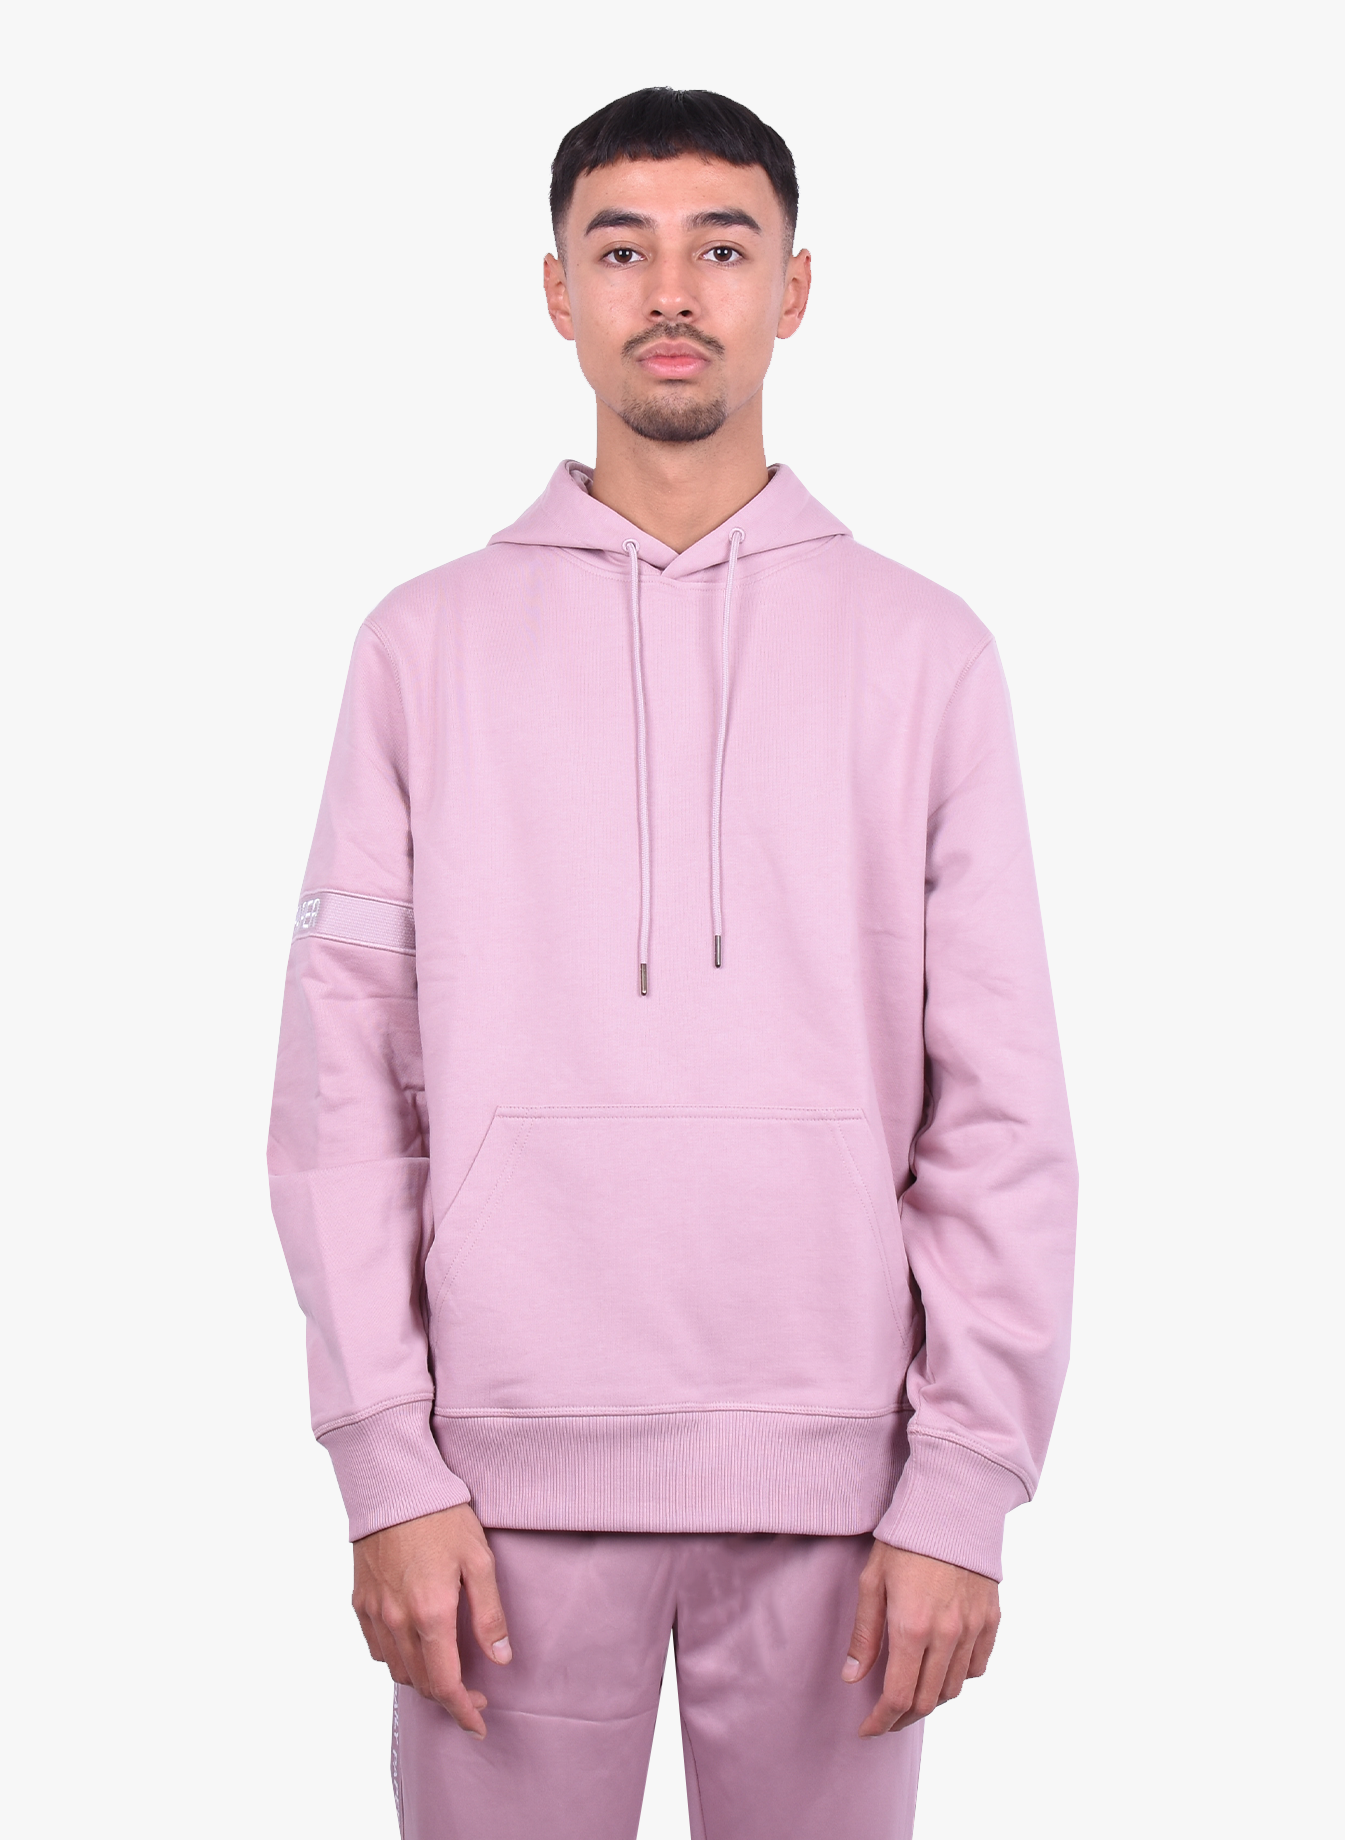 wapen Gemarkeerd munitie Daily Paper 'Captain' Hoodie Old Pink SS22 - Mensquare